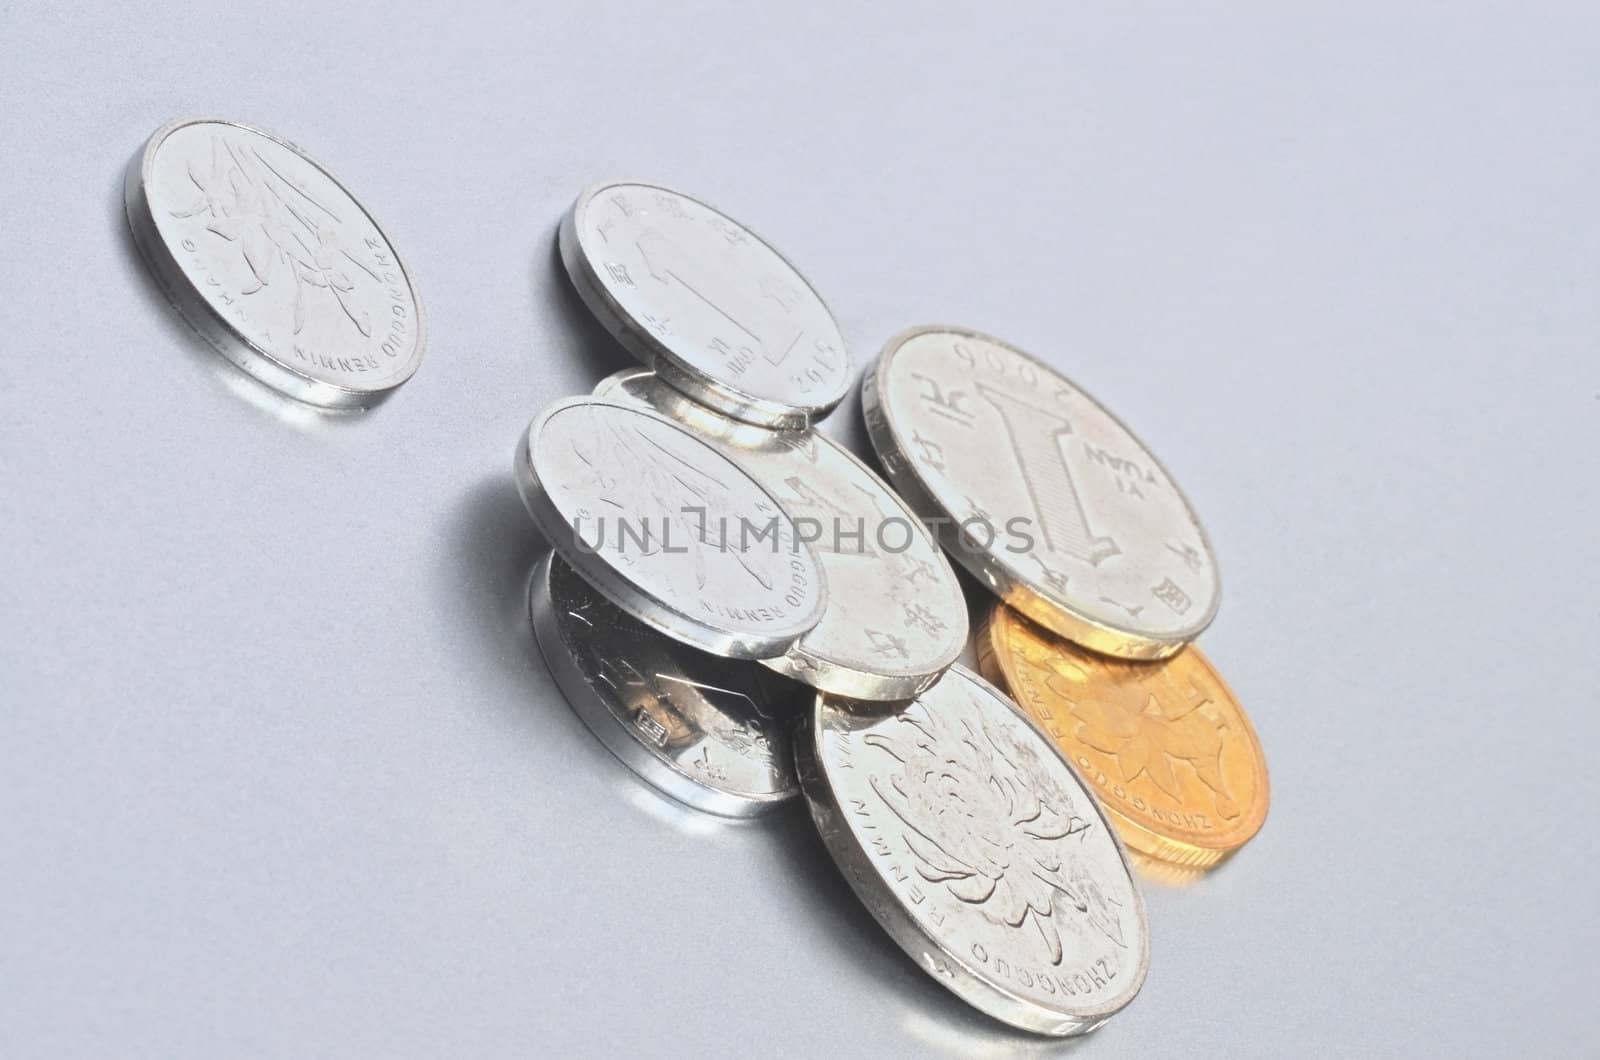 Chinese yuan coins on silver background